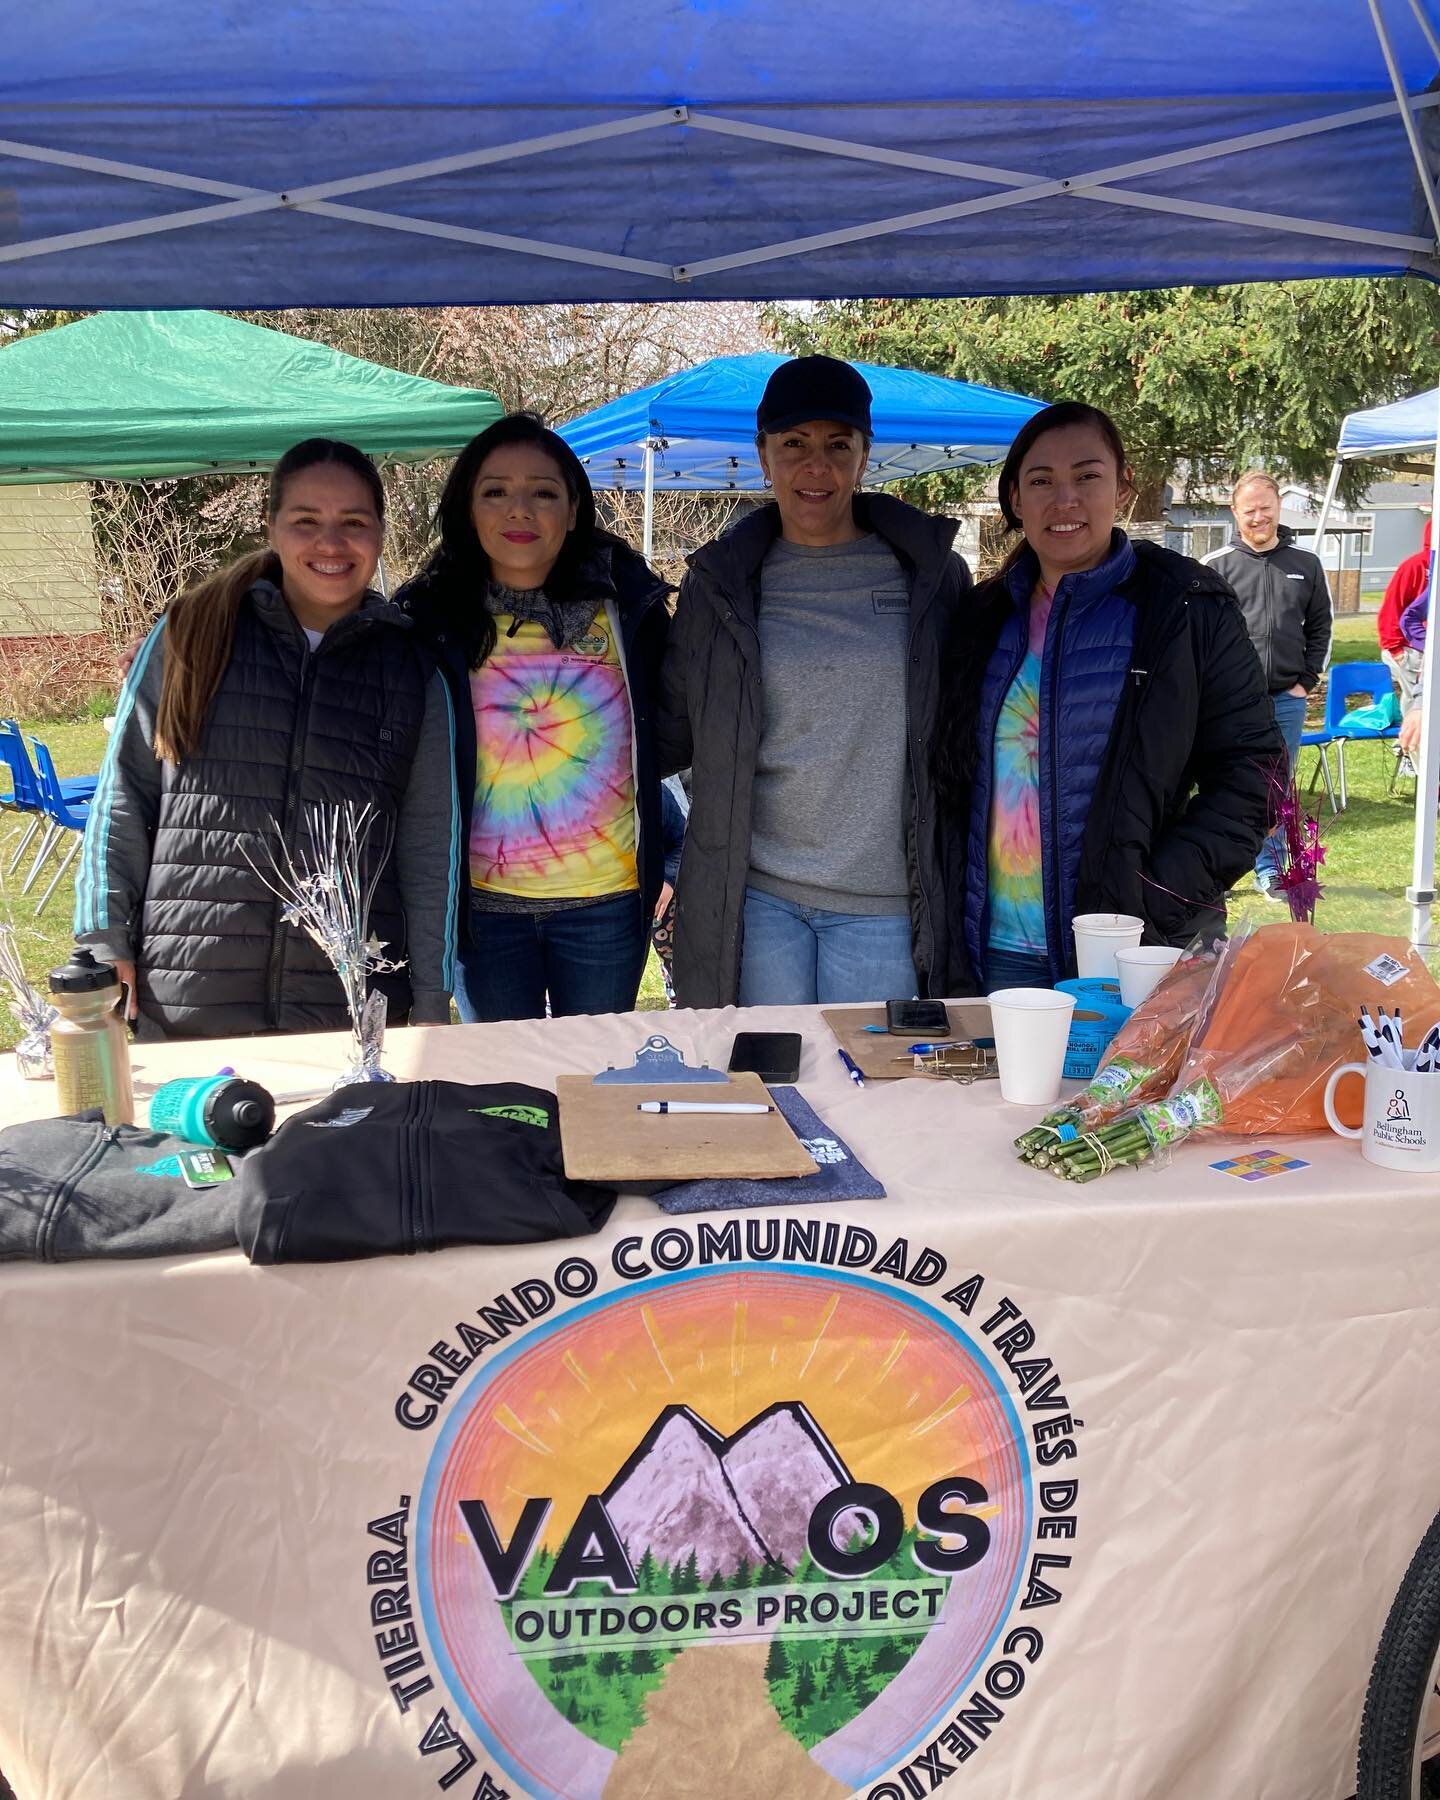 Meet the moms!!! 💕

Sandra, Heymi, Jennifer and Esmeralda are the mentors that lead our Fiesta de Libros, a bilingual literacy program that Vamos hosts in Bellingham elementary schools and community sites. 📚
At fiesta de libros, students have the o